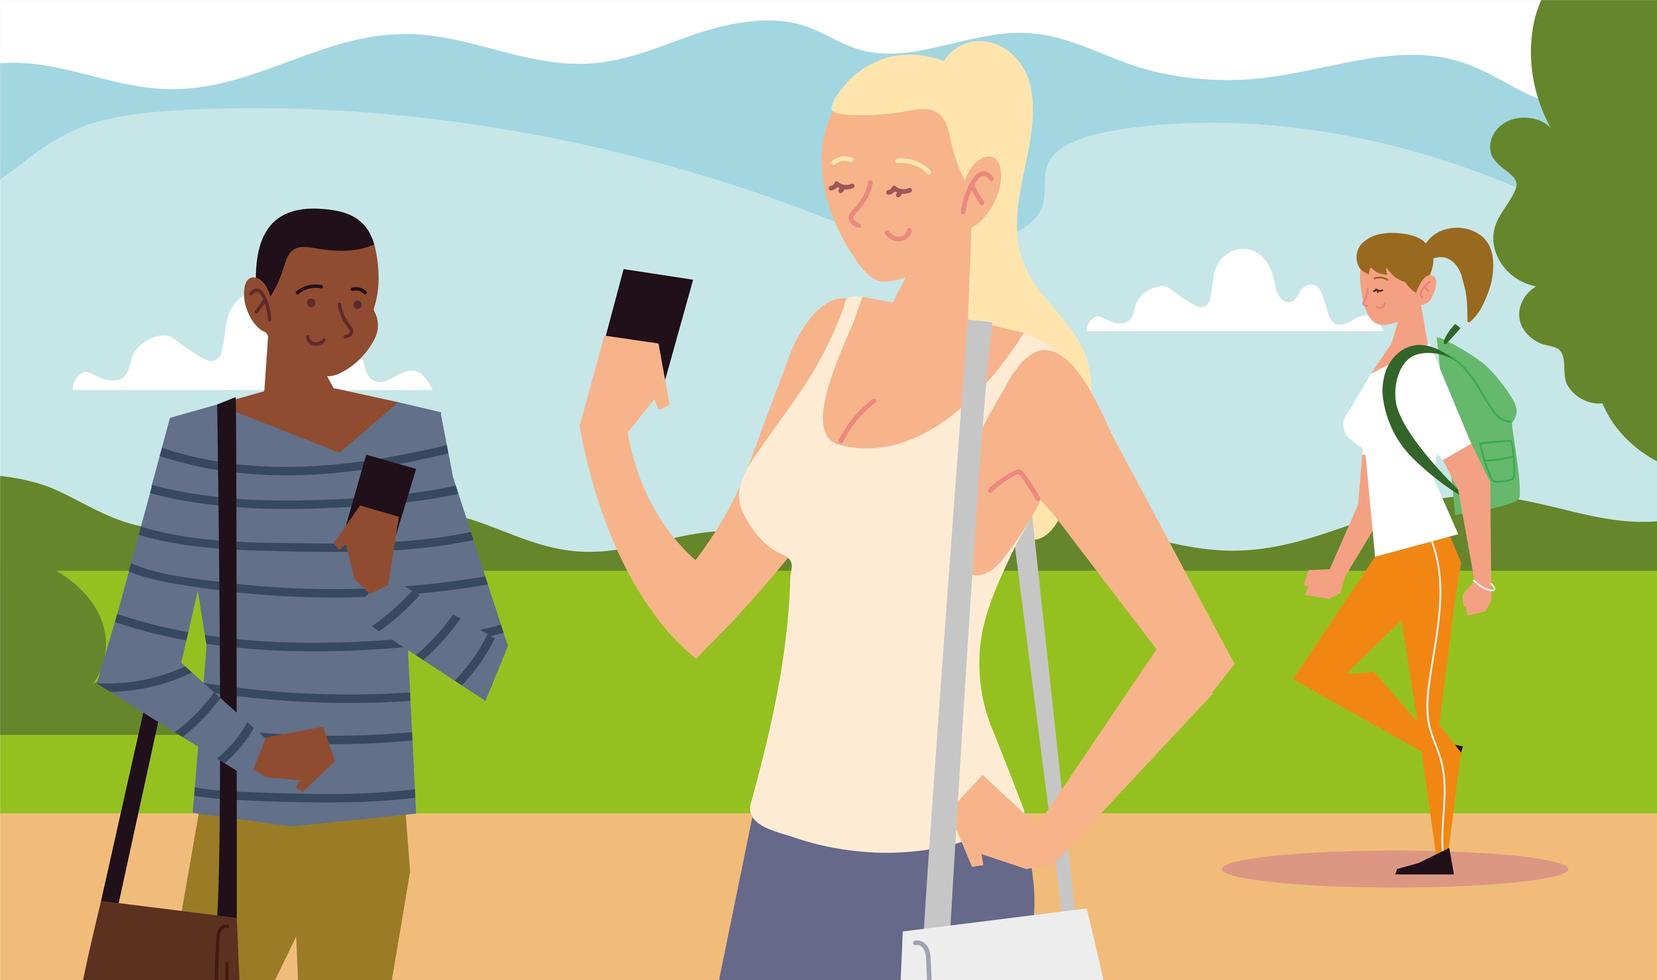 people outdoor activity, persons with smartphone and girl walking vector